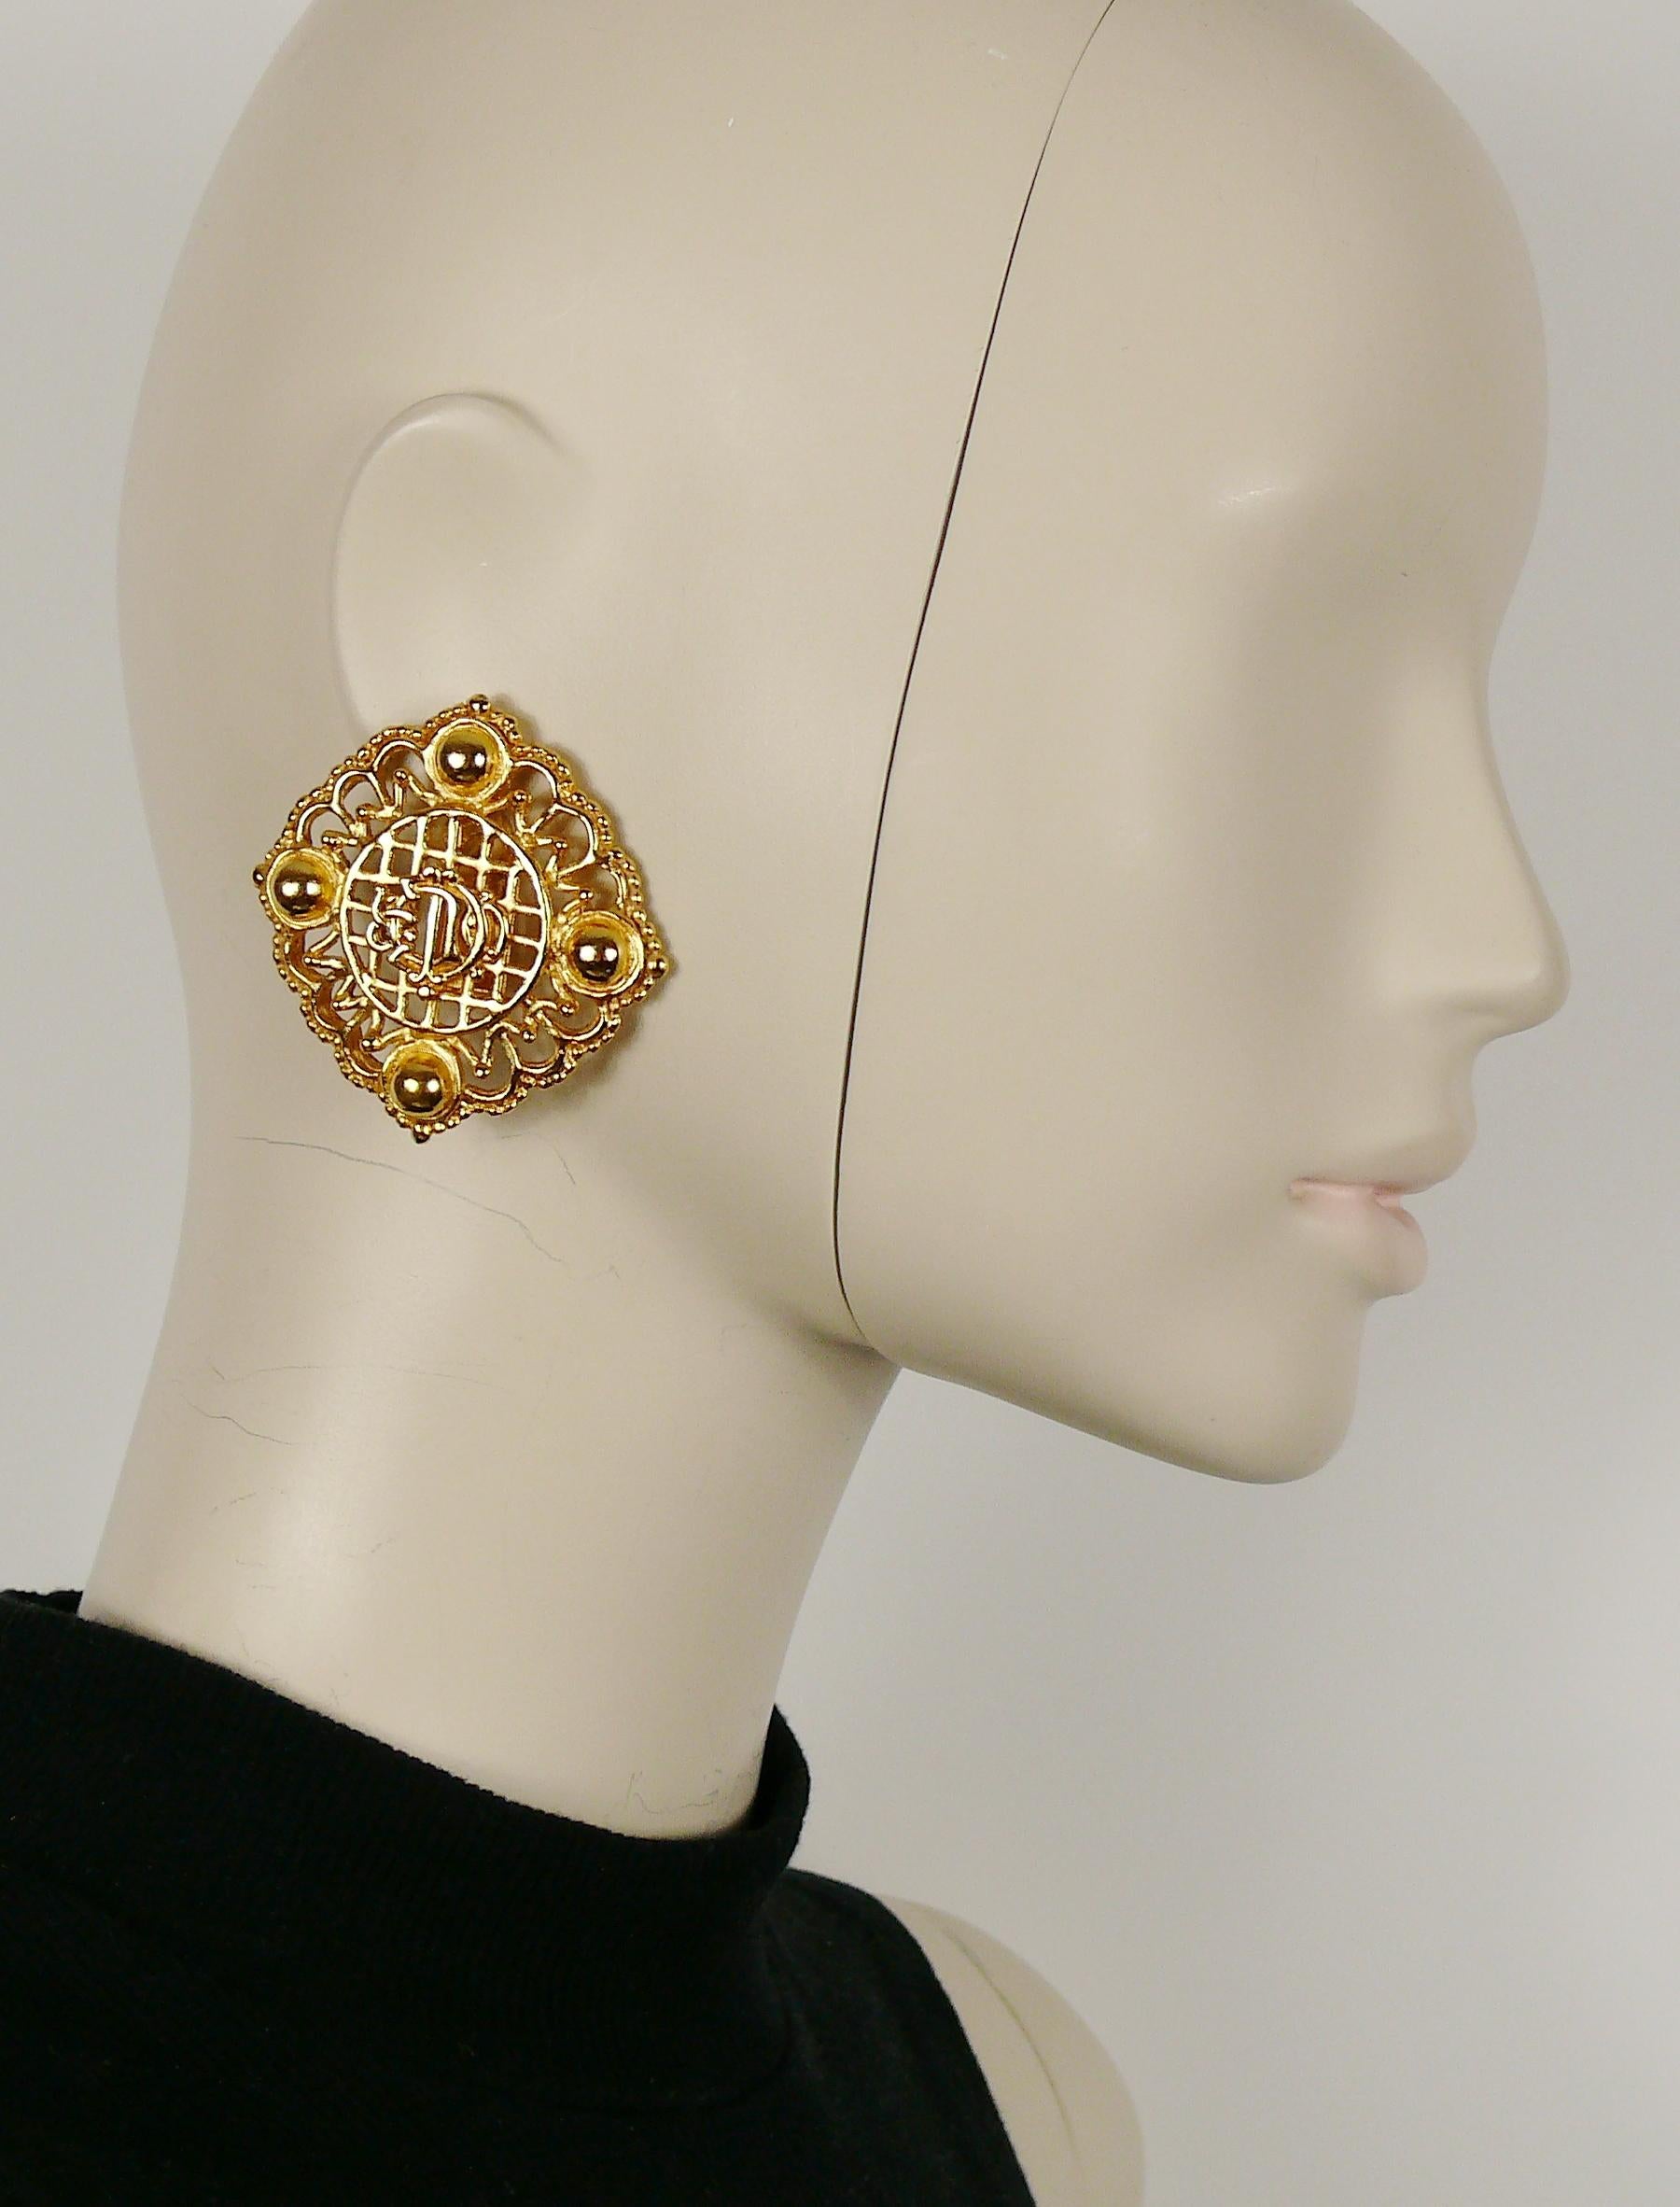 CHRISTIAN DIOR vintage massive gold toned openwork logo clip-on earrings.

Marked CHR. DIOR © Germany.

Indicative measurements : approx. 5.2 cm x 5.4 cm (2.05 inches x 2.13 inches).

IMPORTANT INFORMATION
Please note that one logo is reversed as